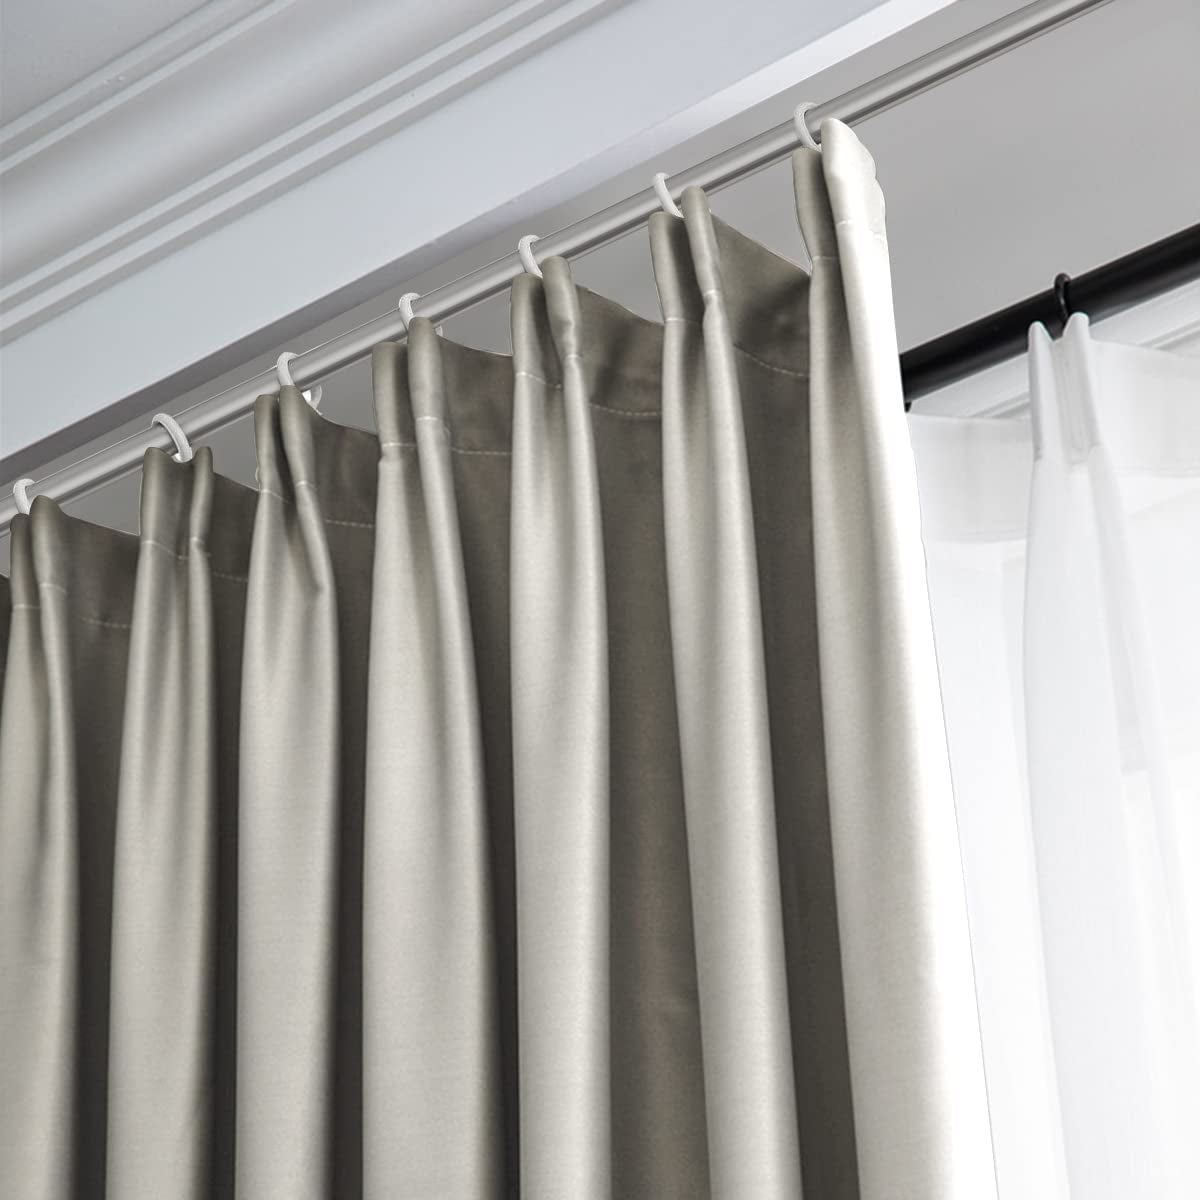 IYUEGO Pinch Pleat Solid Thermal Insulated 95% Blackout Patio Door Curtain Panel Drape for Traverse Rod and Track, Beige 84" W X 84" L (One Panel)  I Love Curtains   